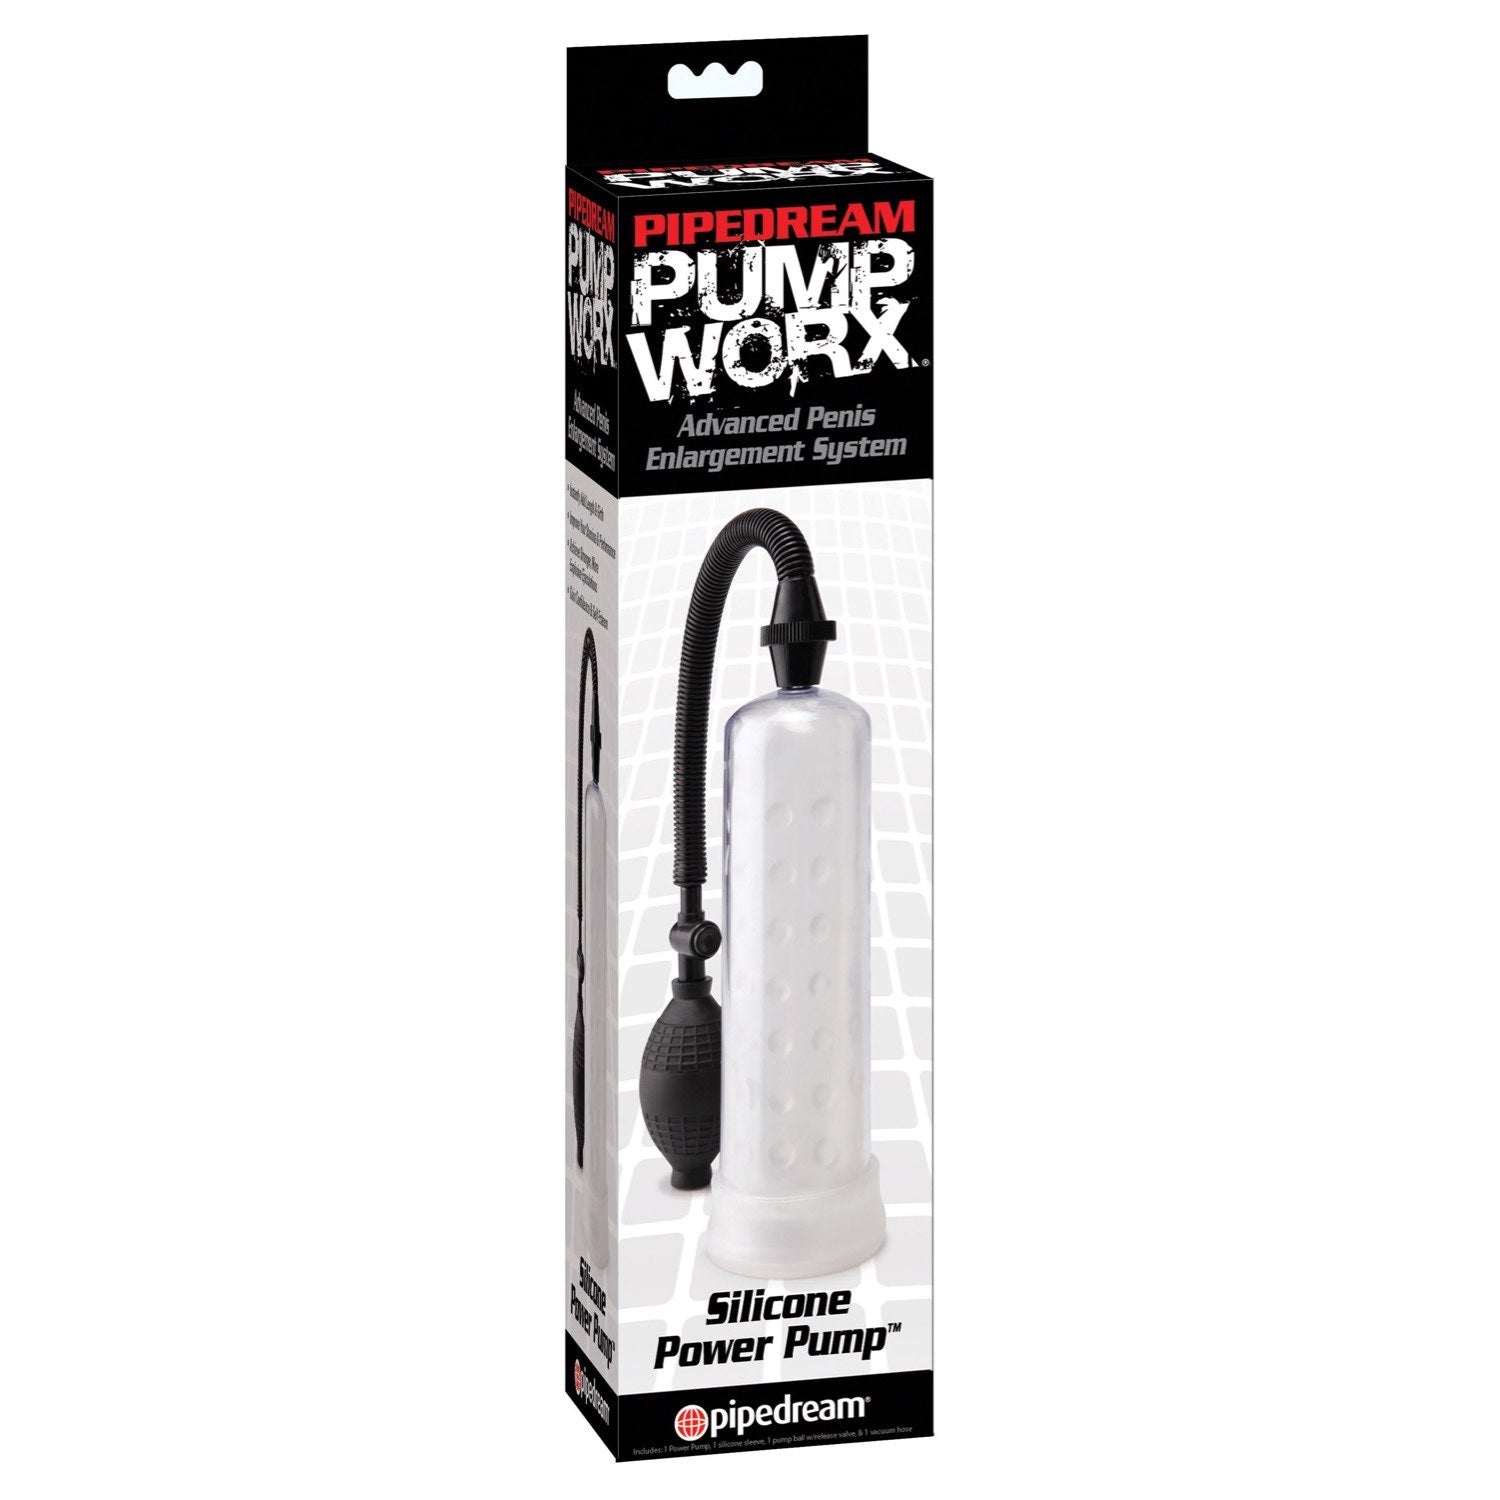 Pump Worx Silicone Power Pump - Clear Penis Pump by Pipedream